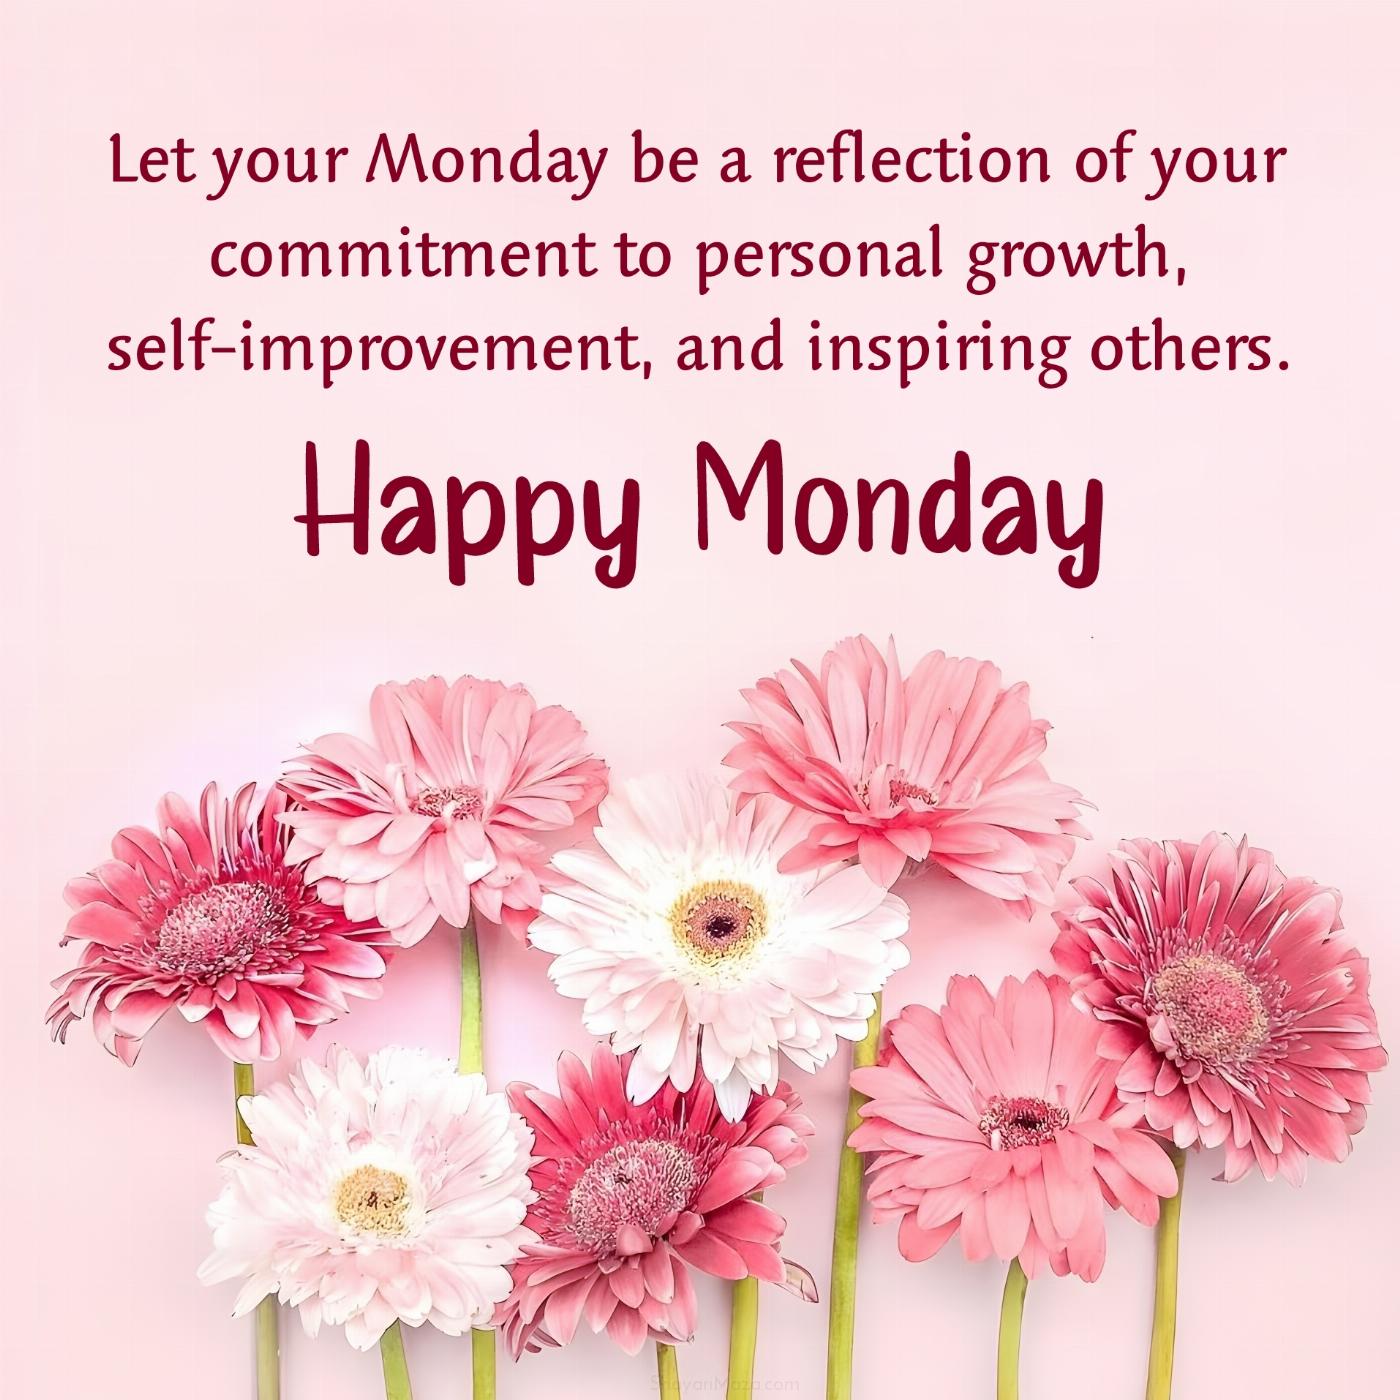 Let your Monday be a reflection of your commitment to personal growth